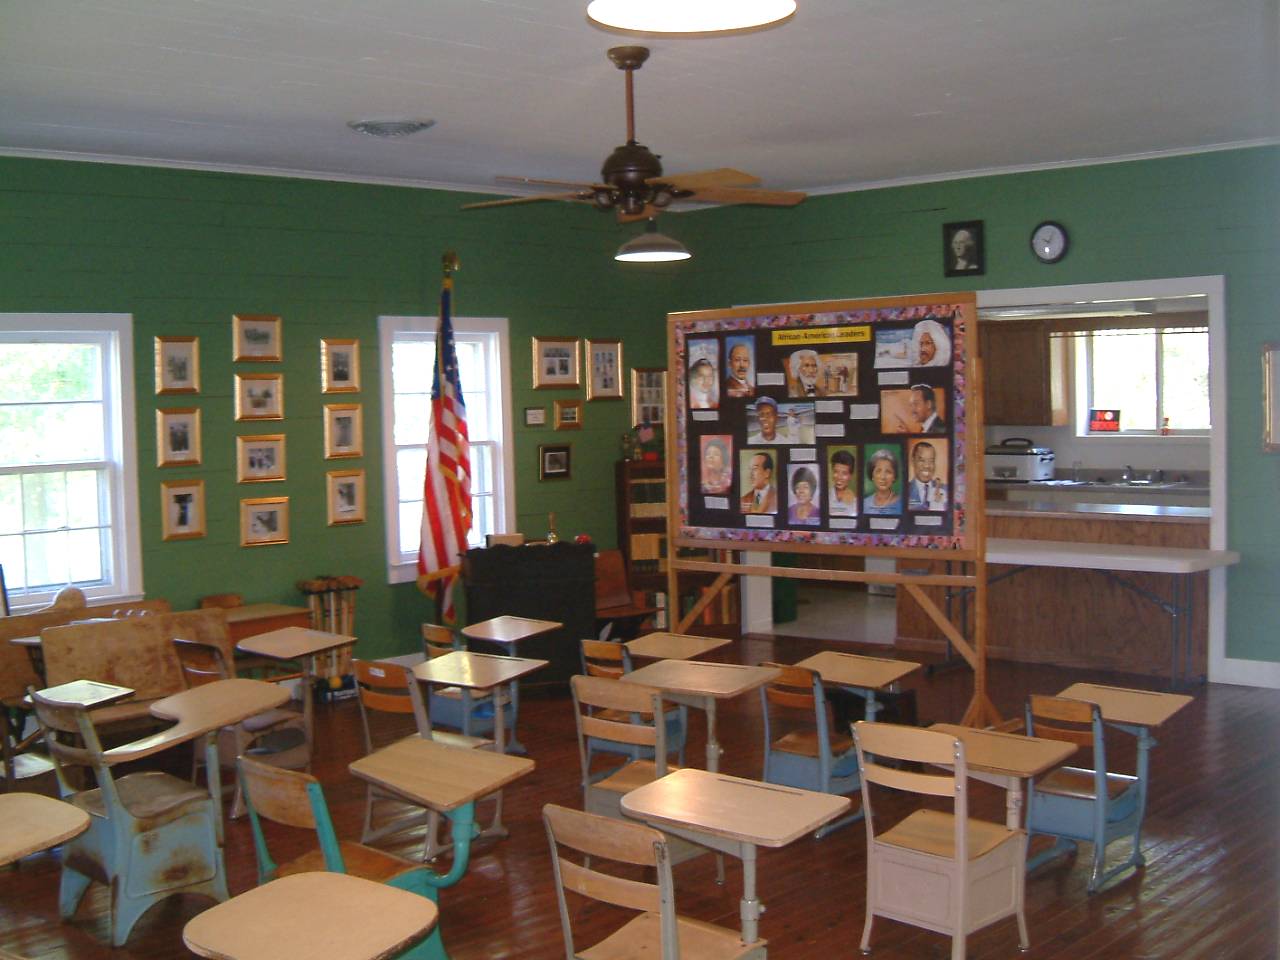 Inside view of old one-room school.